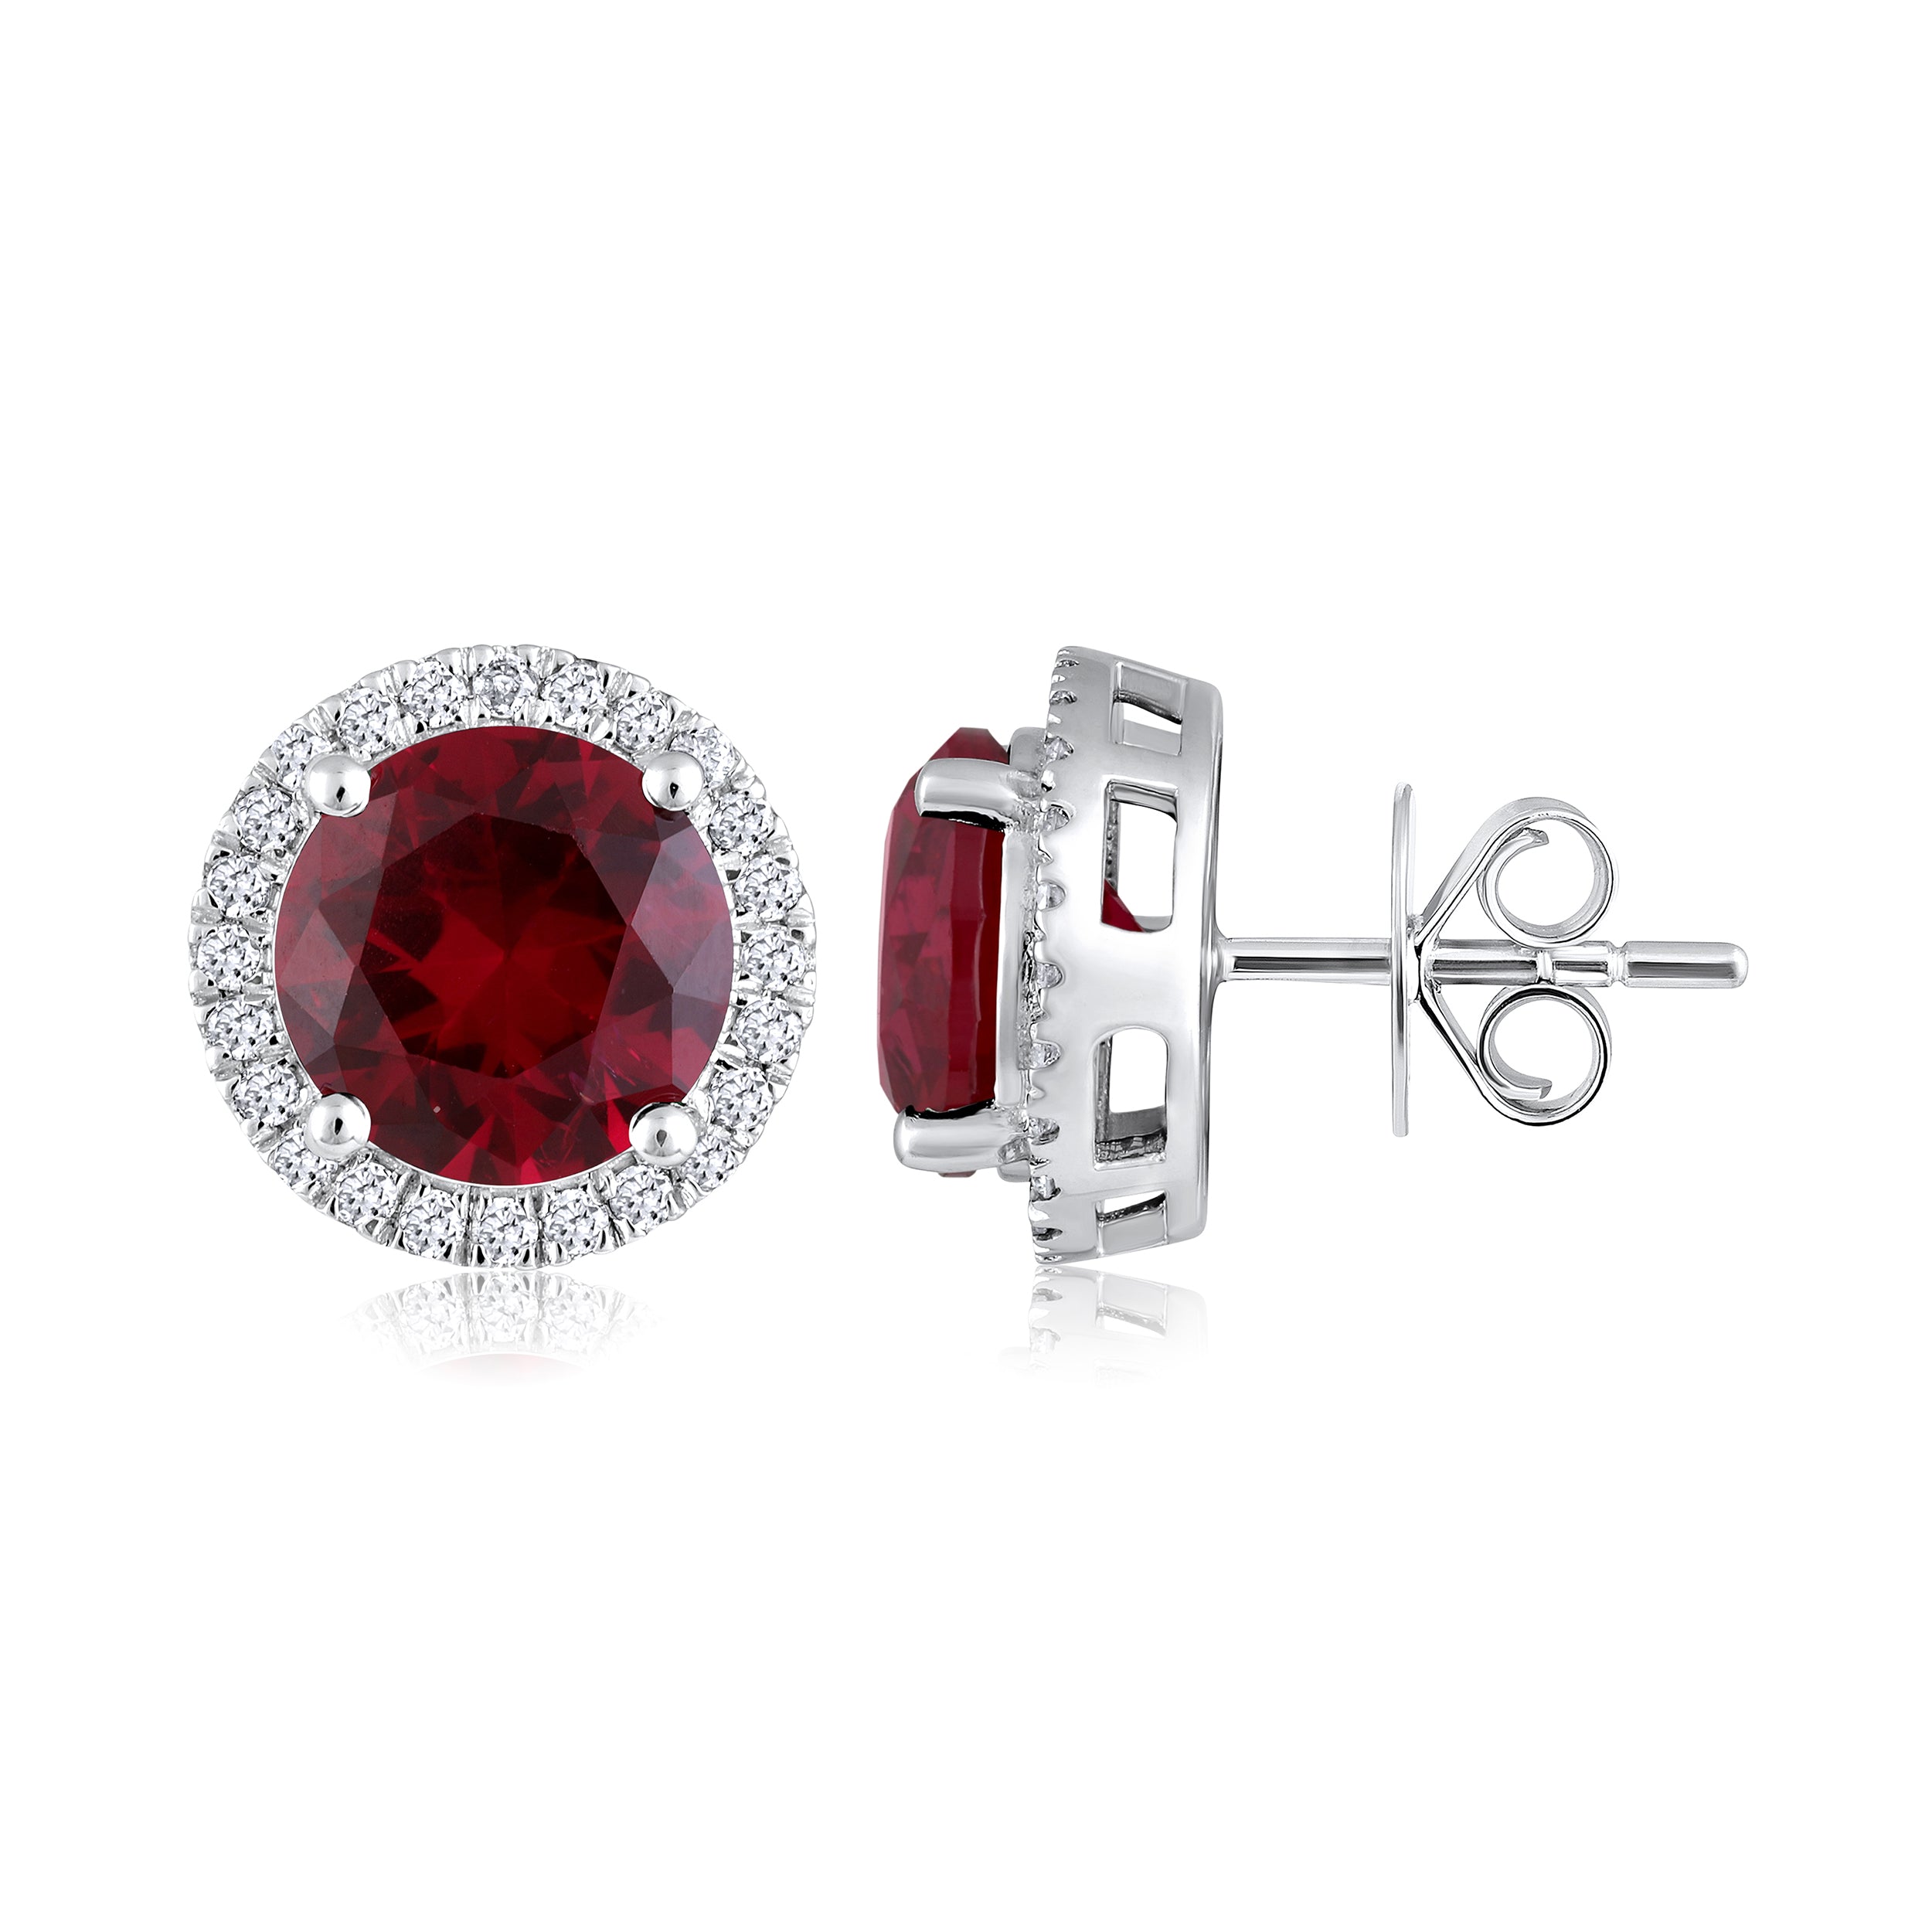 Certified 14K Gold 6.74ct Natural Diamond w/ Simulated Ruby Round Solitaire Stud White Earrings